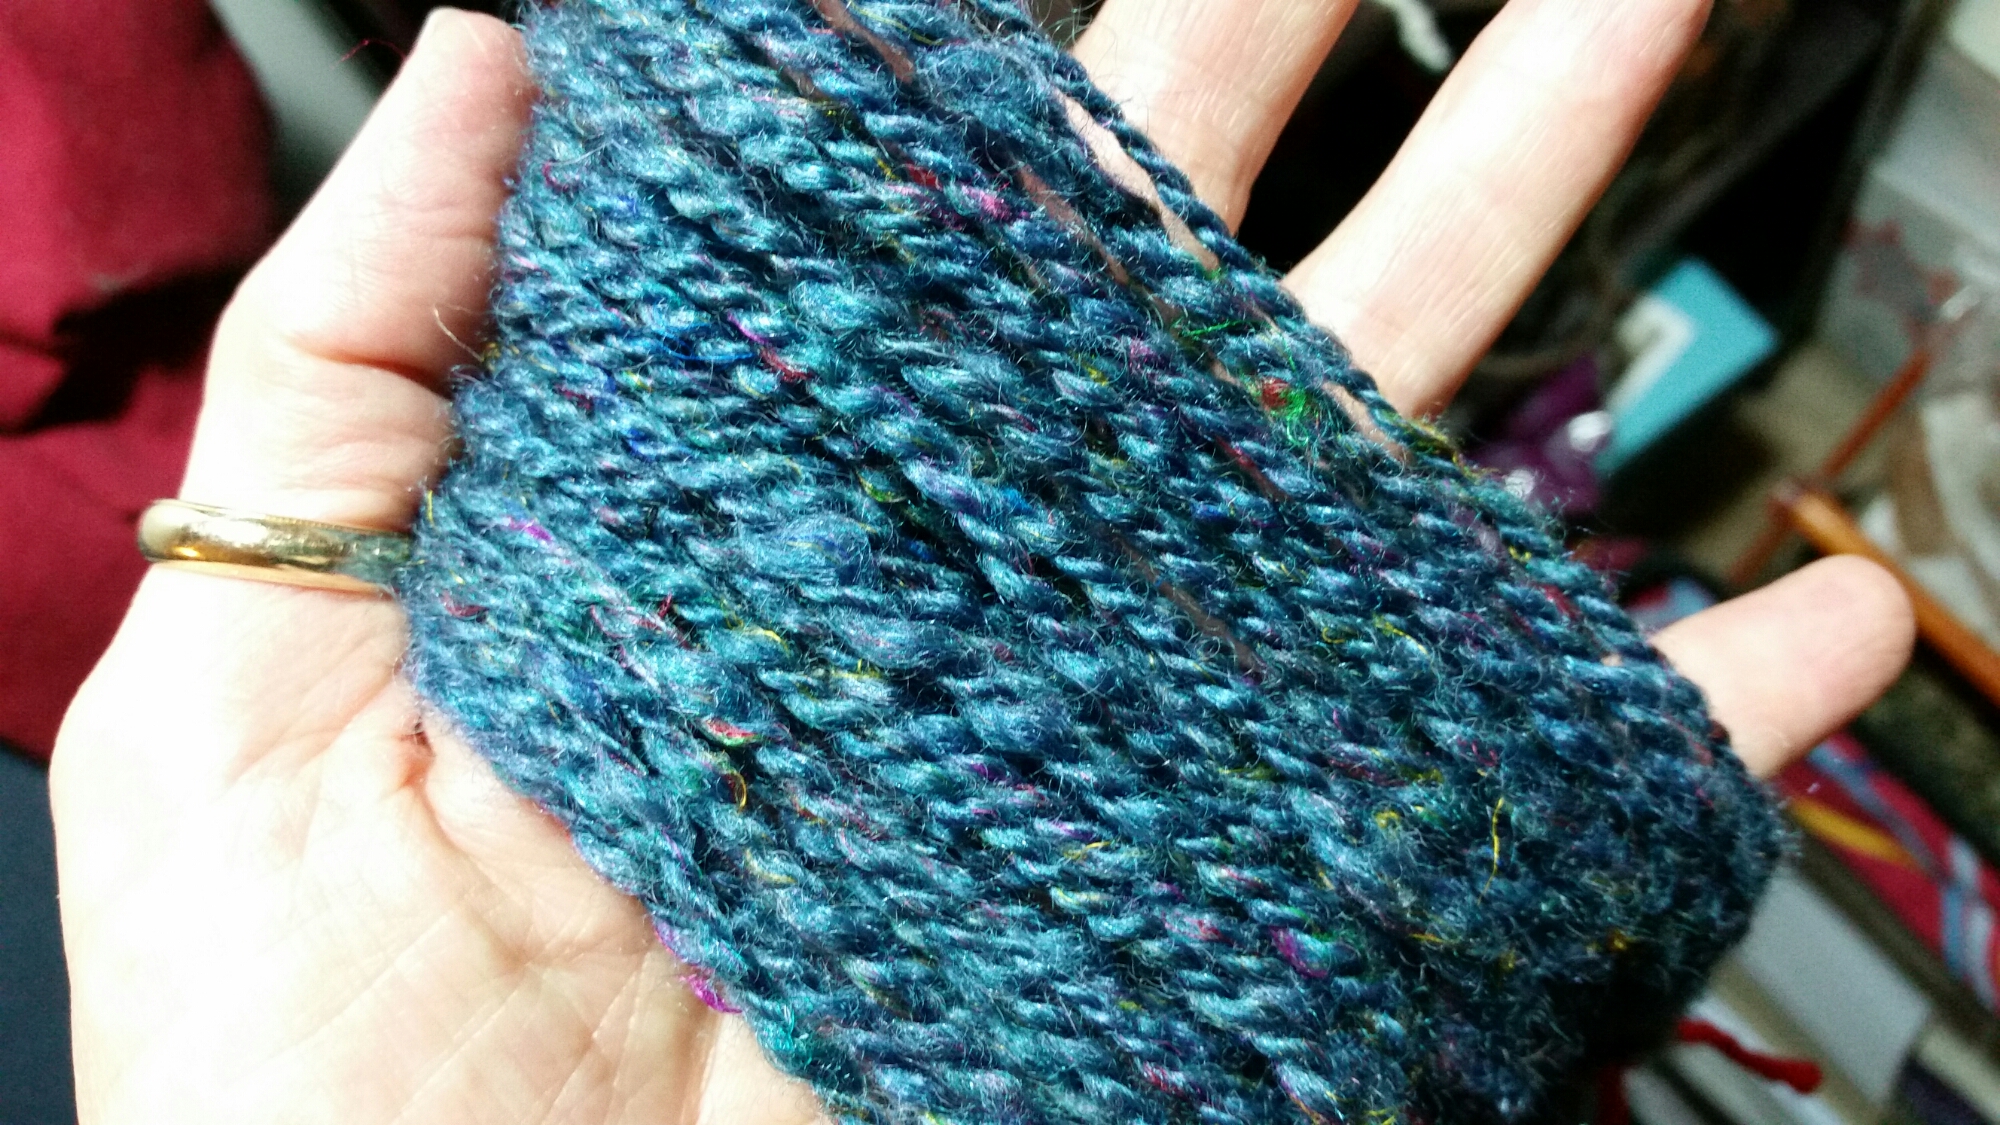 Yarn spun from hand-carded SGY Riptide and Nightshade BFL-Silk Blend, with sari silk fibers included.